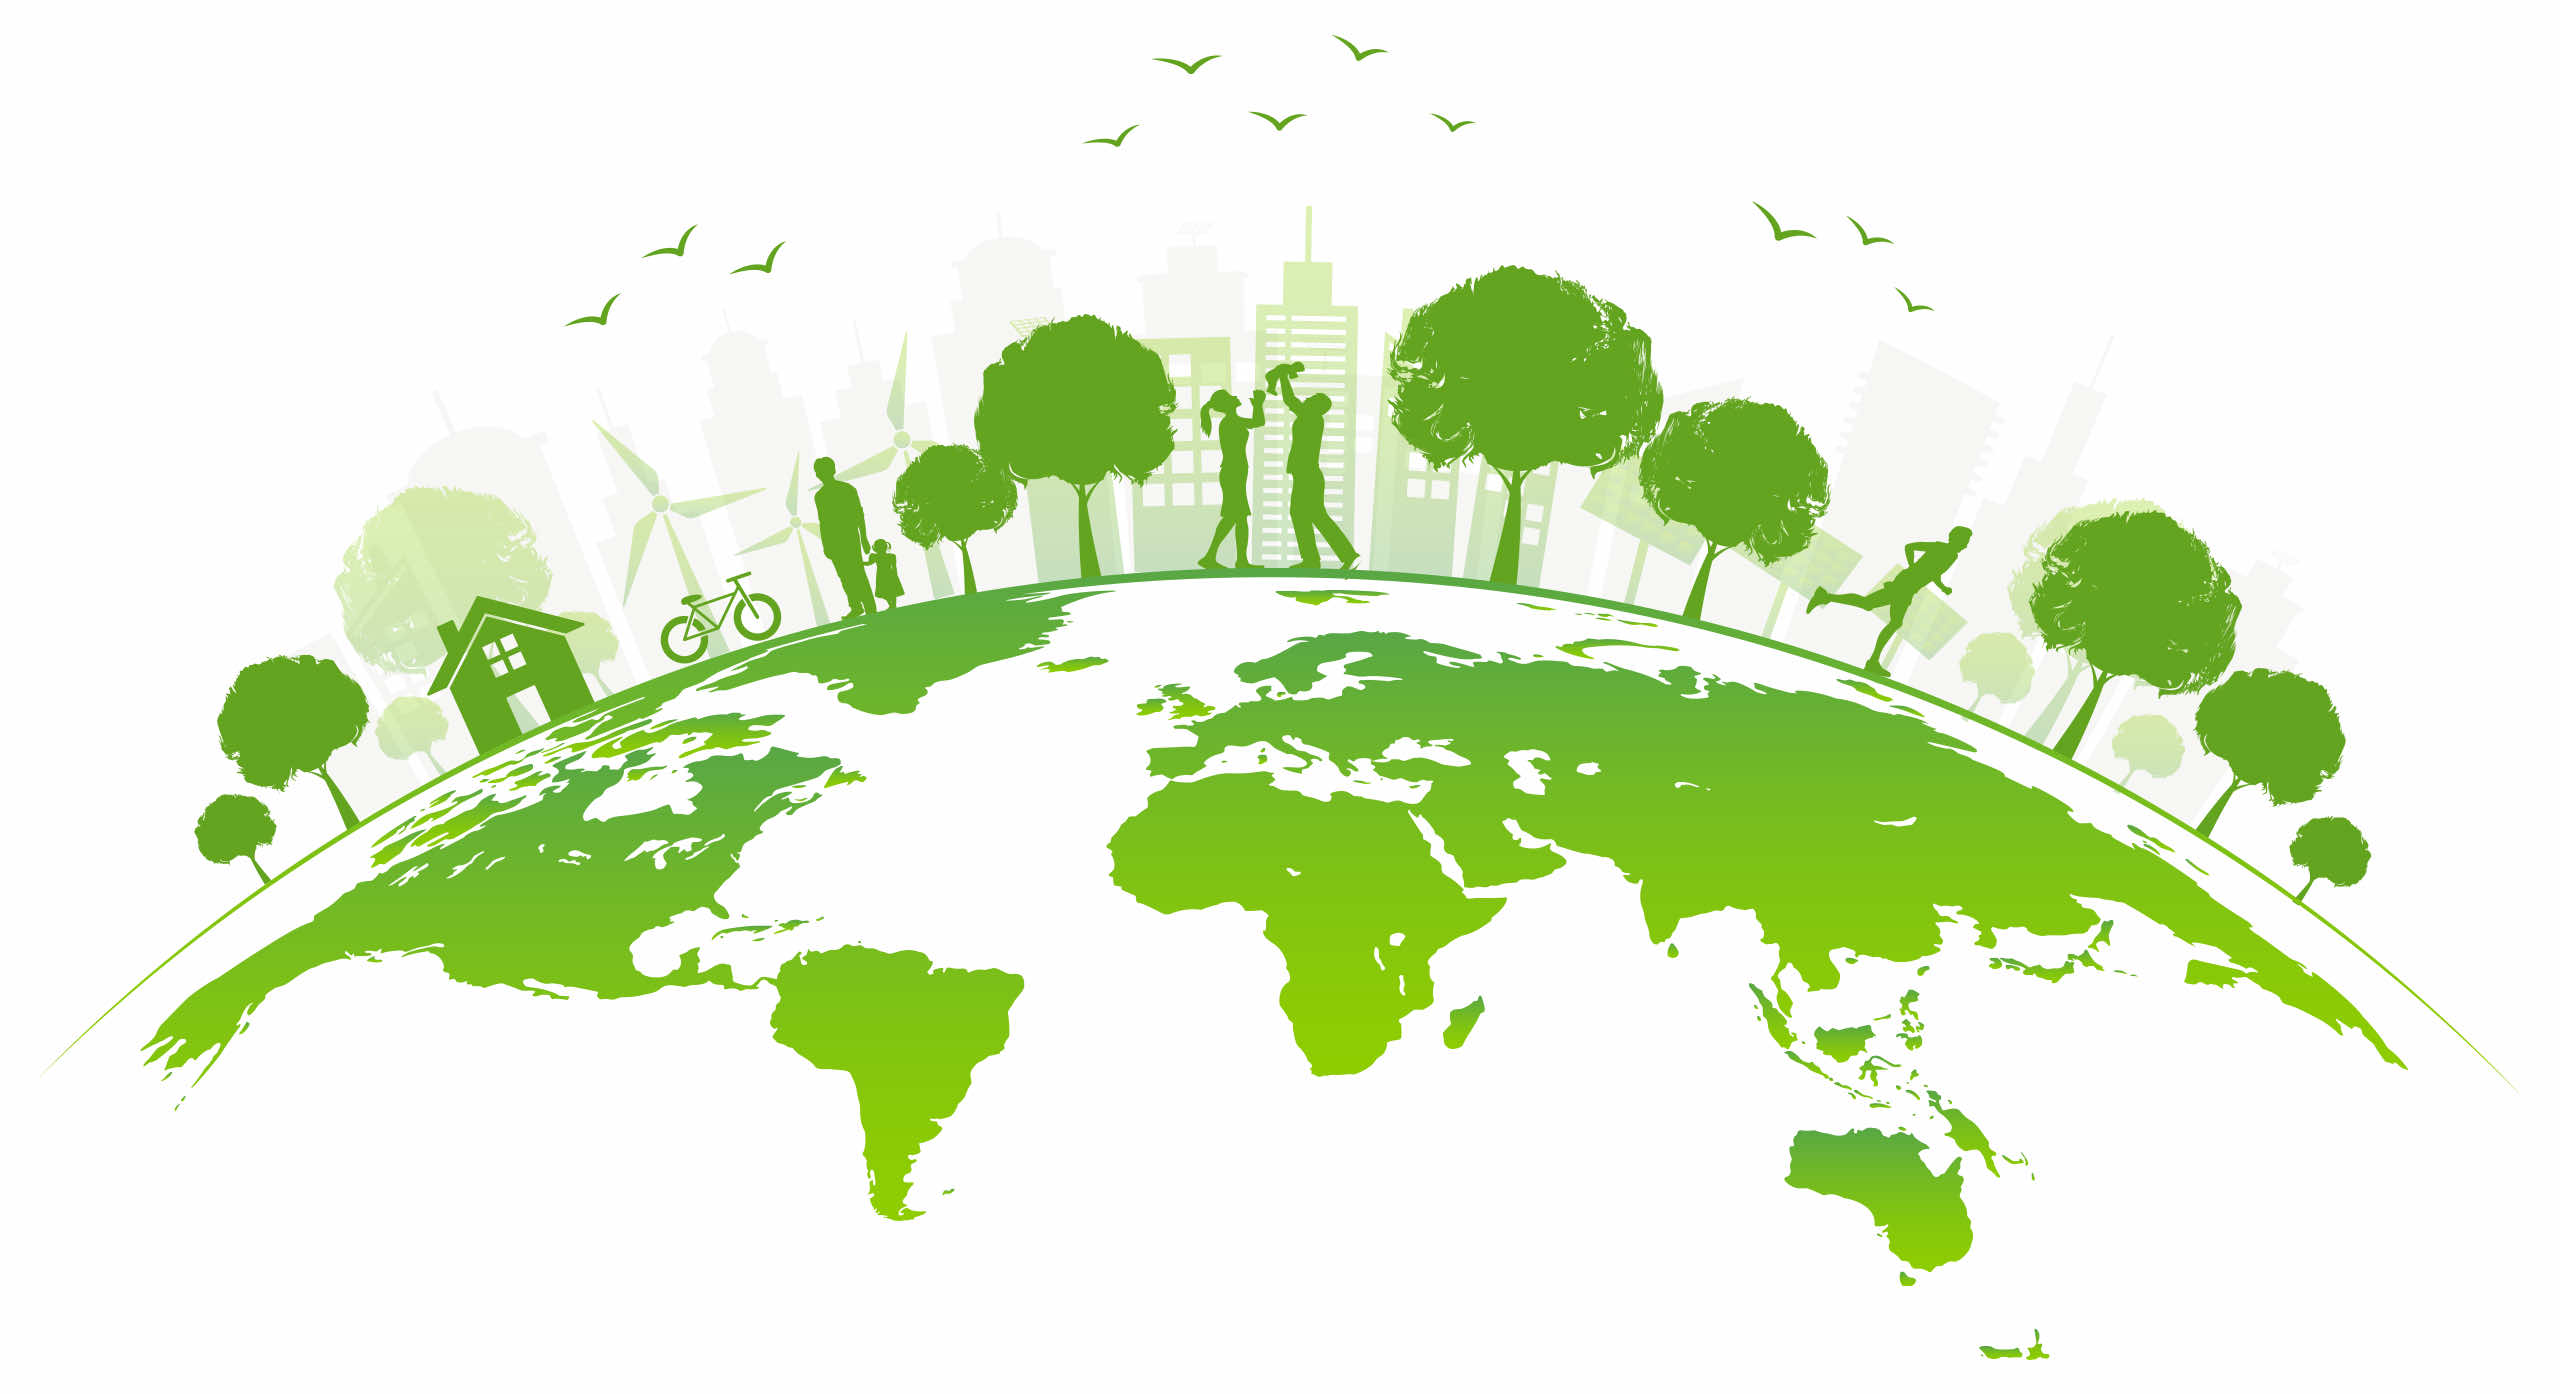 The human right to a clean and sustainable environment